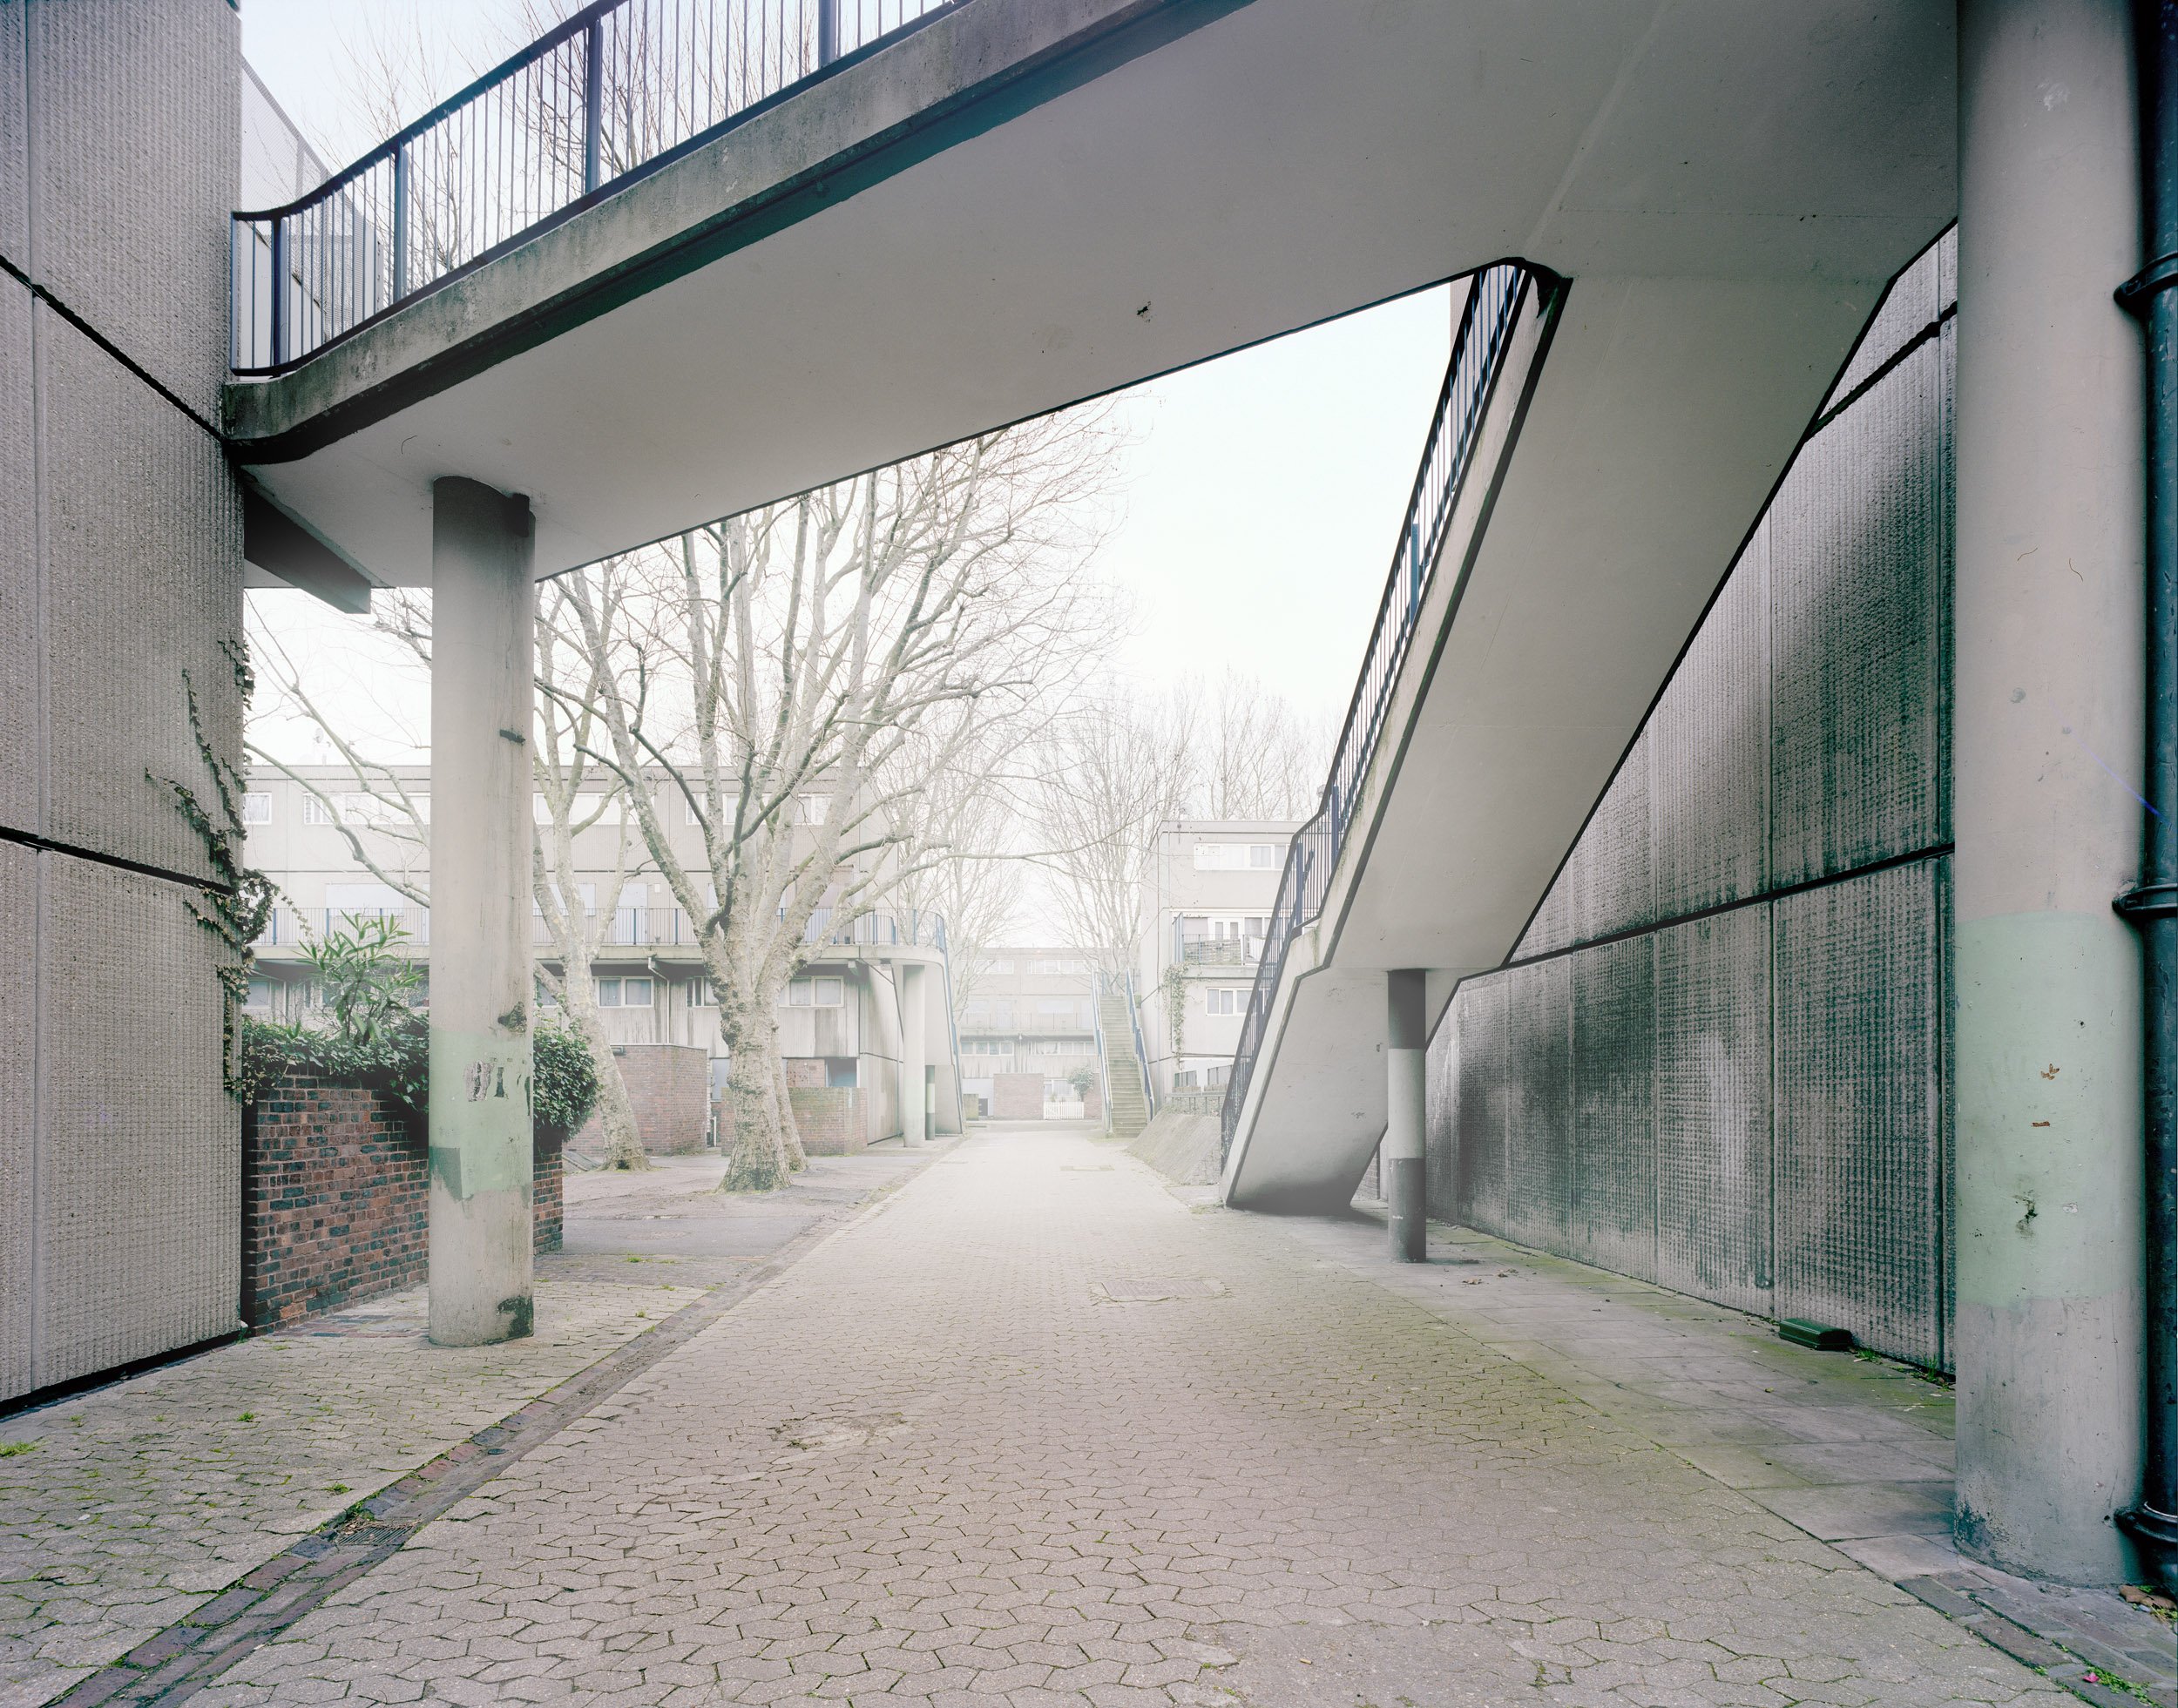 heygate-abstracted-simon-kennedy-mass-collective-photography-architecture-00012.jpg